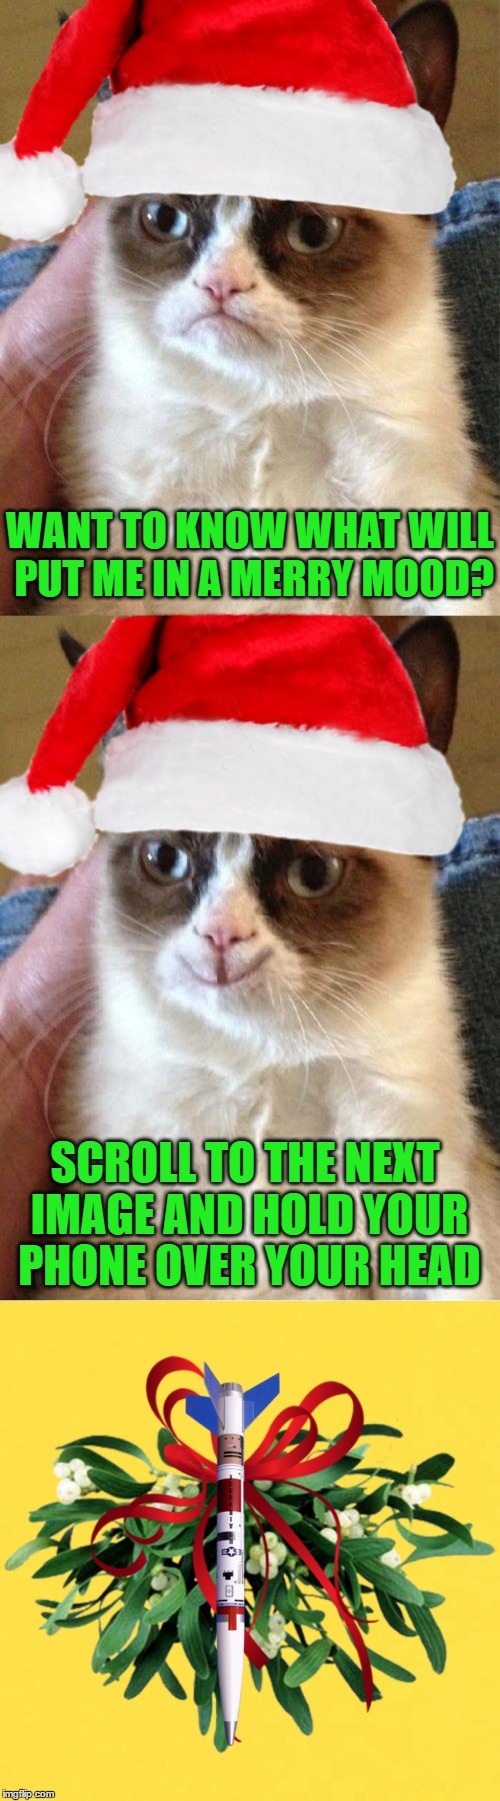 Grumpy Cat Says, "Let The Festivities Begin" | WANT TO KNOW WHAT WILL PUT ME IN A MERRY MOOD? SCROLL TO THE NEXT IMAGE AND HOLD YOUR PHONE OVER YOUR HEAD | image tagged in grumpy cat christmas,christmas | made w/ Imgflip meme maker